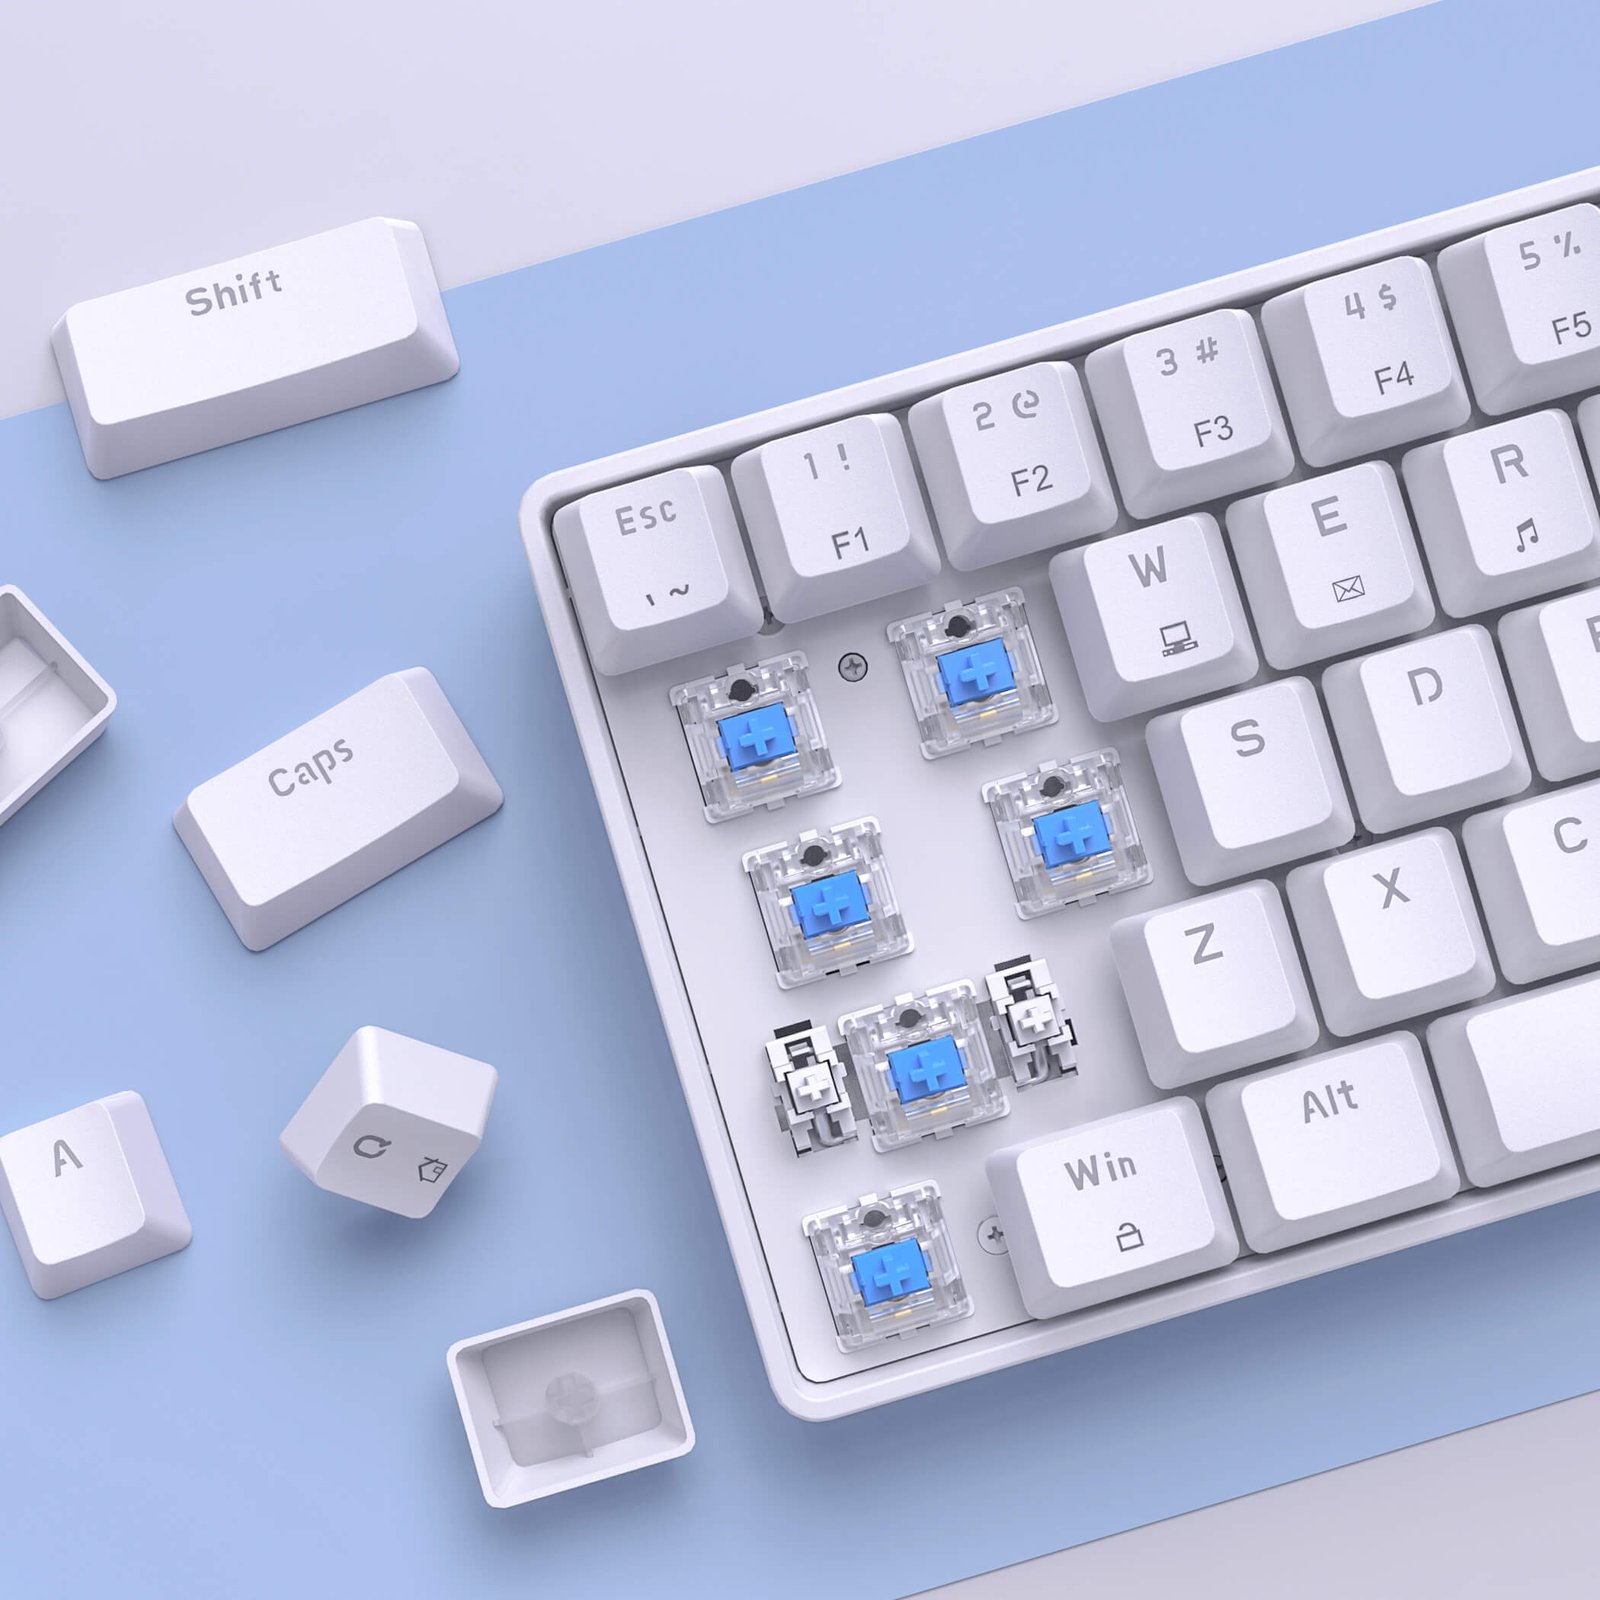 Still Considering an Entry-level Keyboard? Look Here!T68SE for you